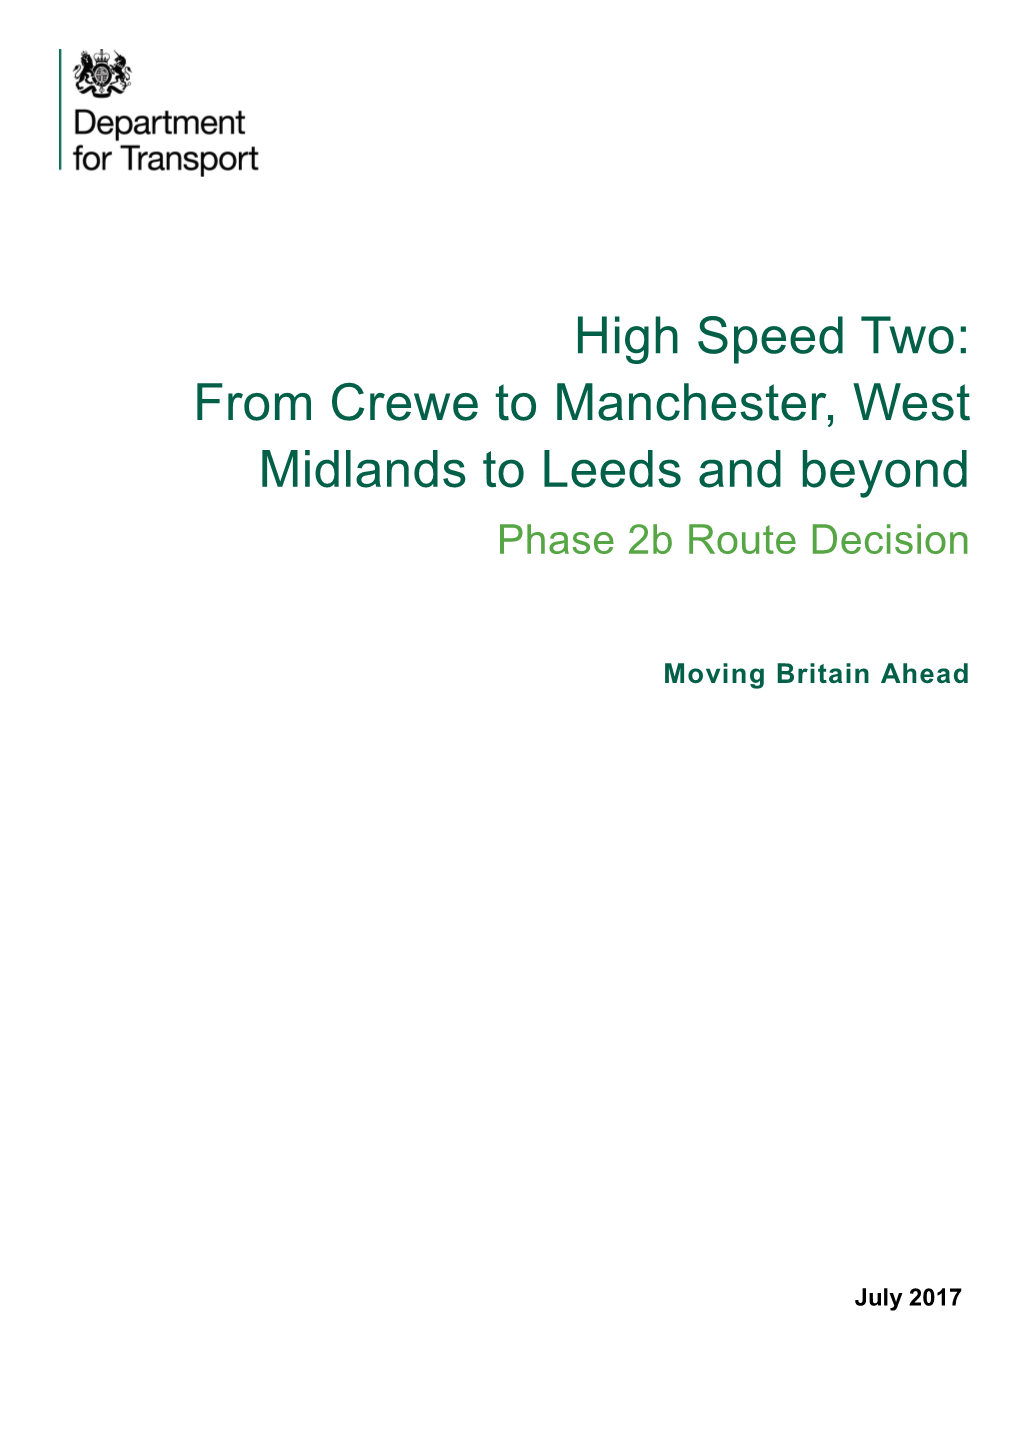 Phase 2B Route Decision